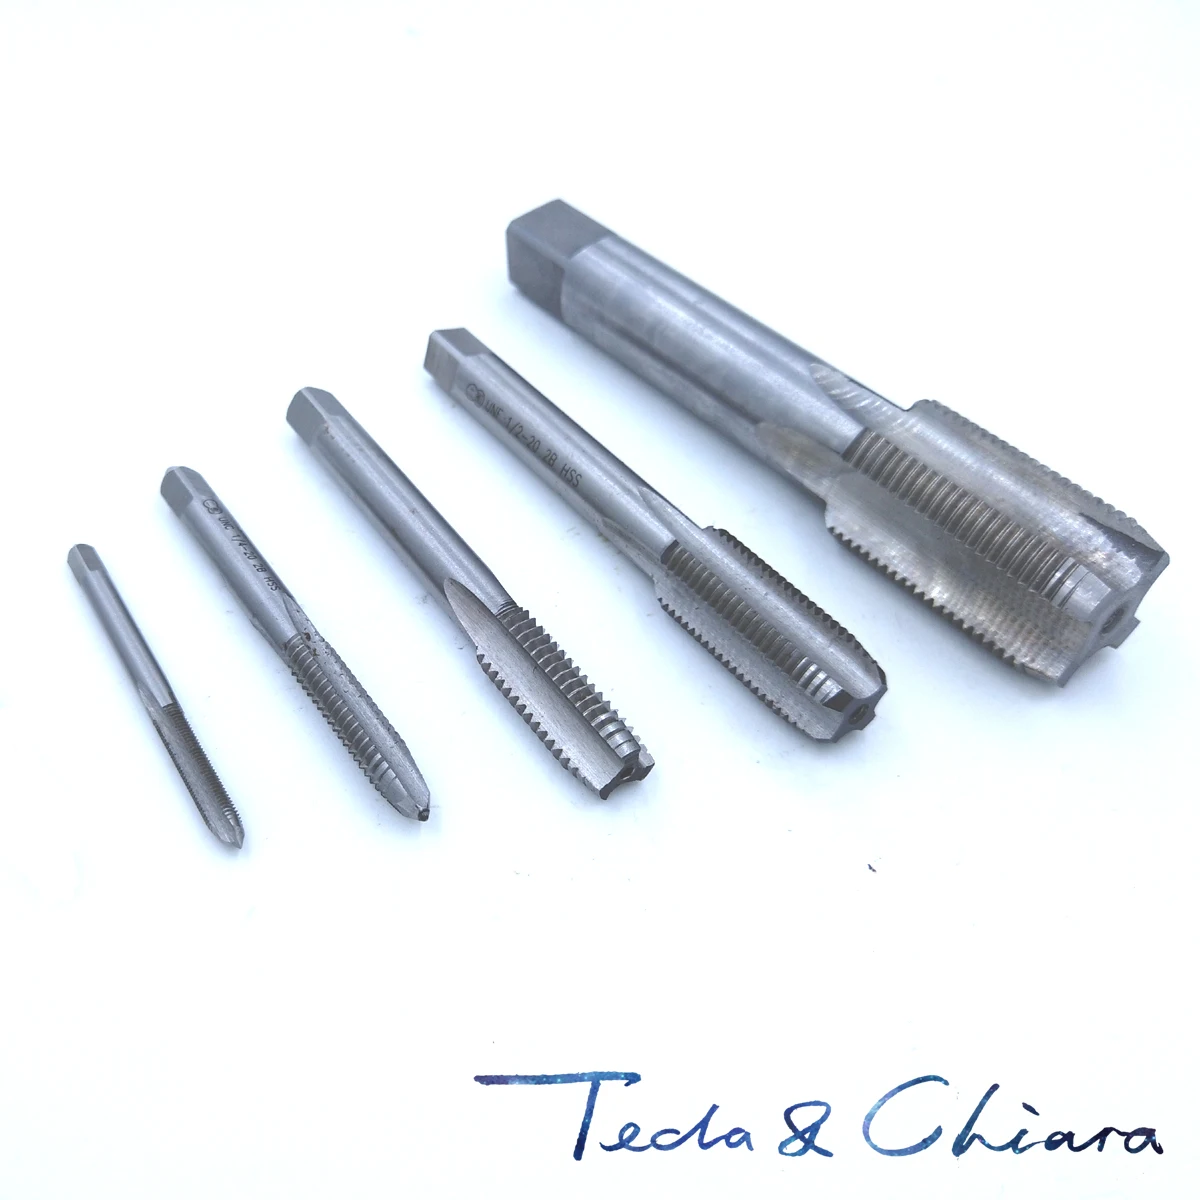 

10Pcs M16 X 1mm 1.5mm 2mm Left Hand Metric Tap Pitch Threading Tools For Mold Machining * 1 1.5 2 mm